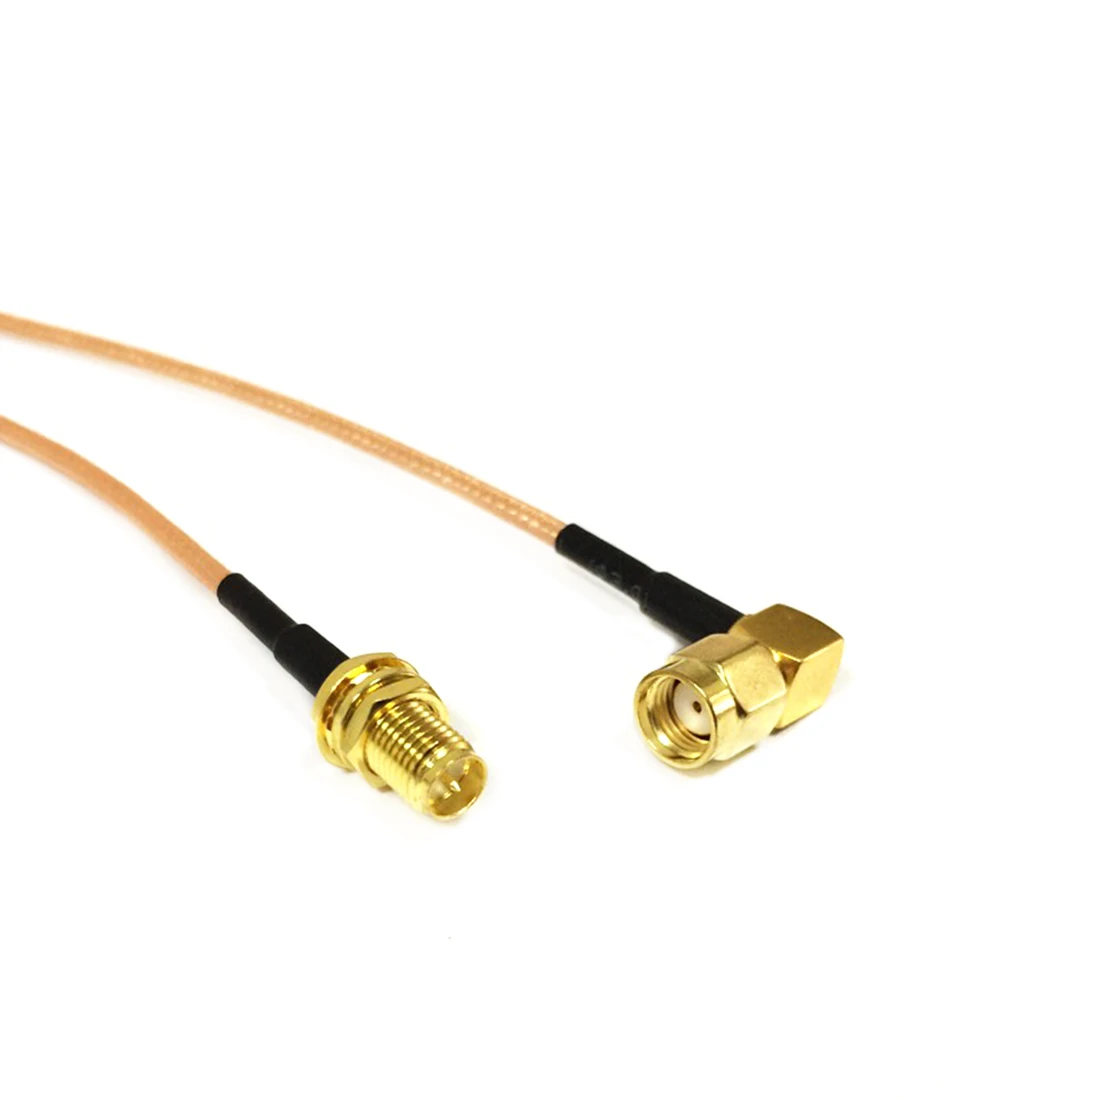 Wireless Router Cable RP SMA Female Jack to RP SMA Male Plug Right Angle RG316 Cable Pigtail 15cm 6inch Pigtail